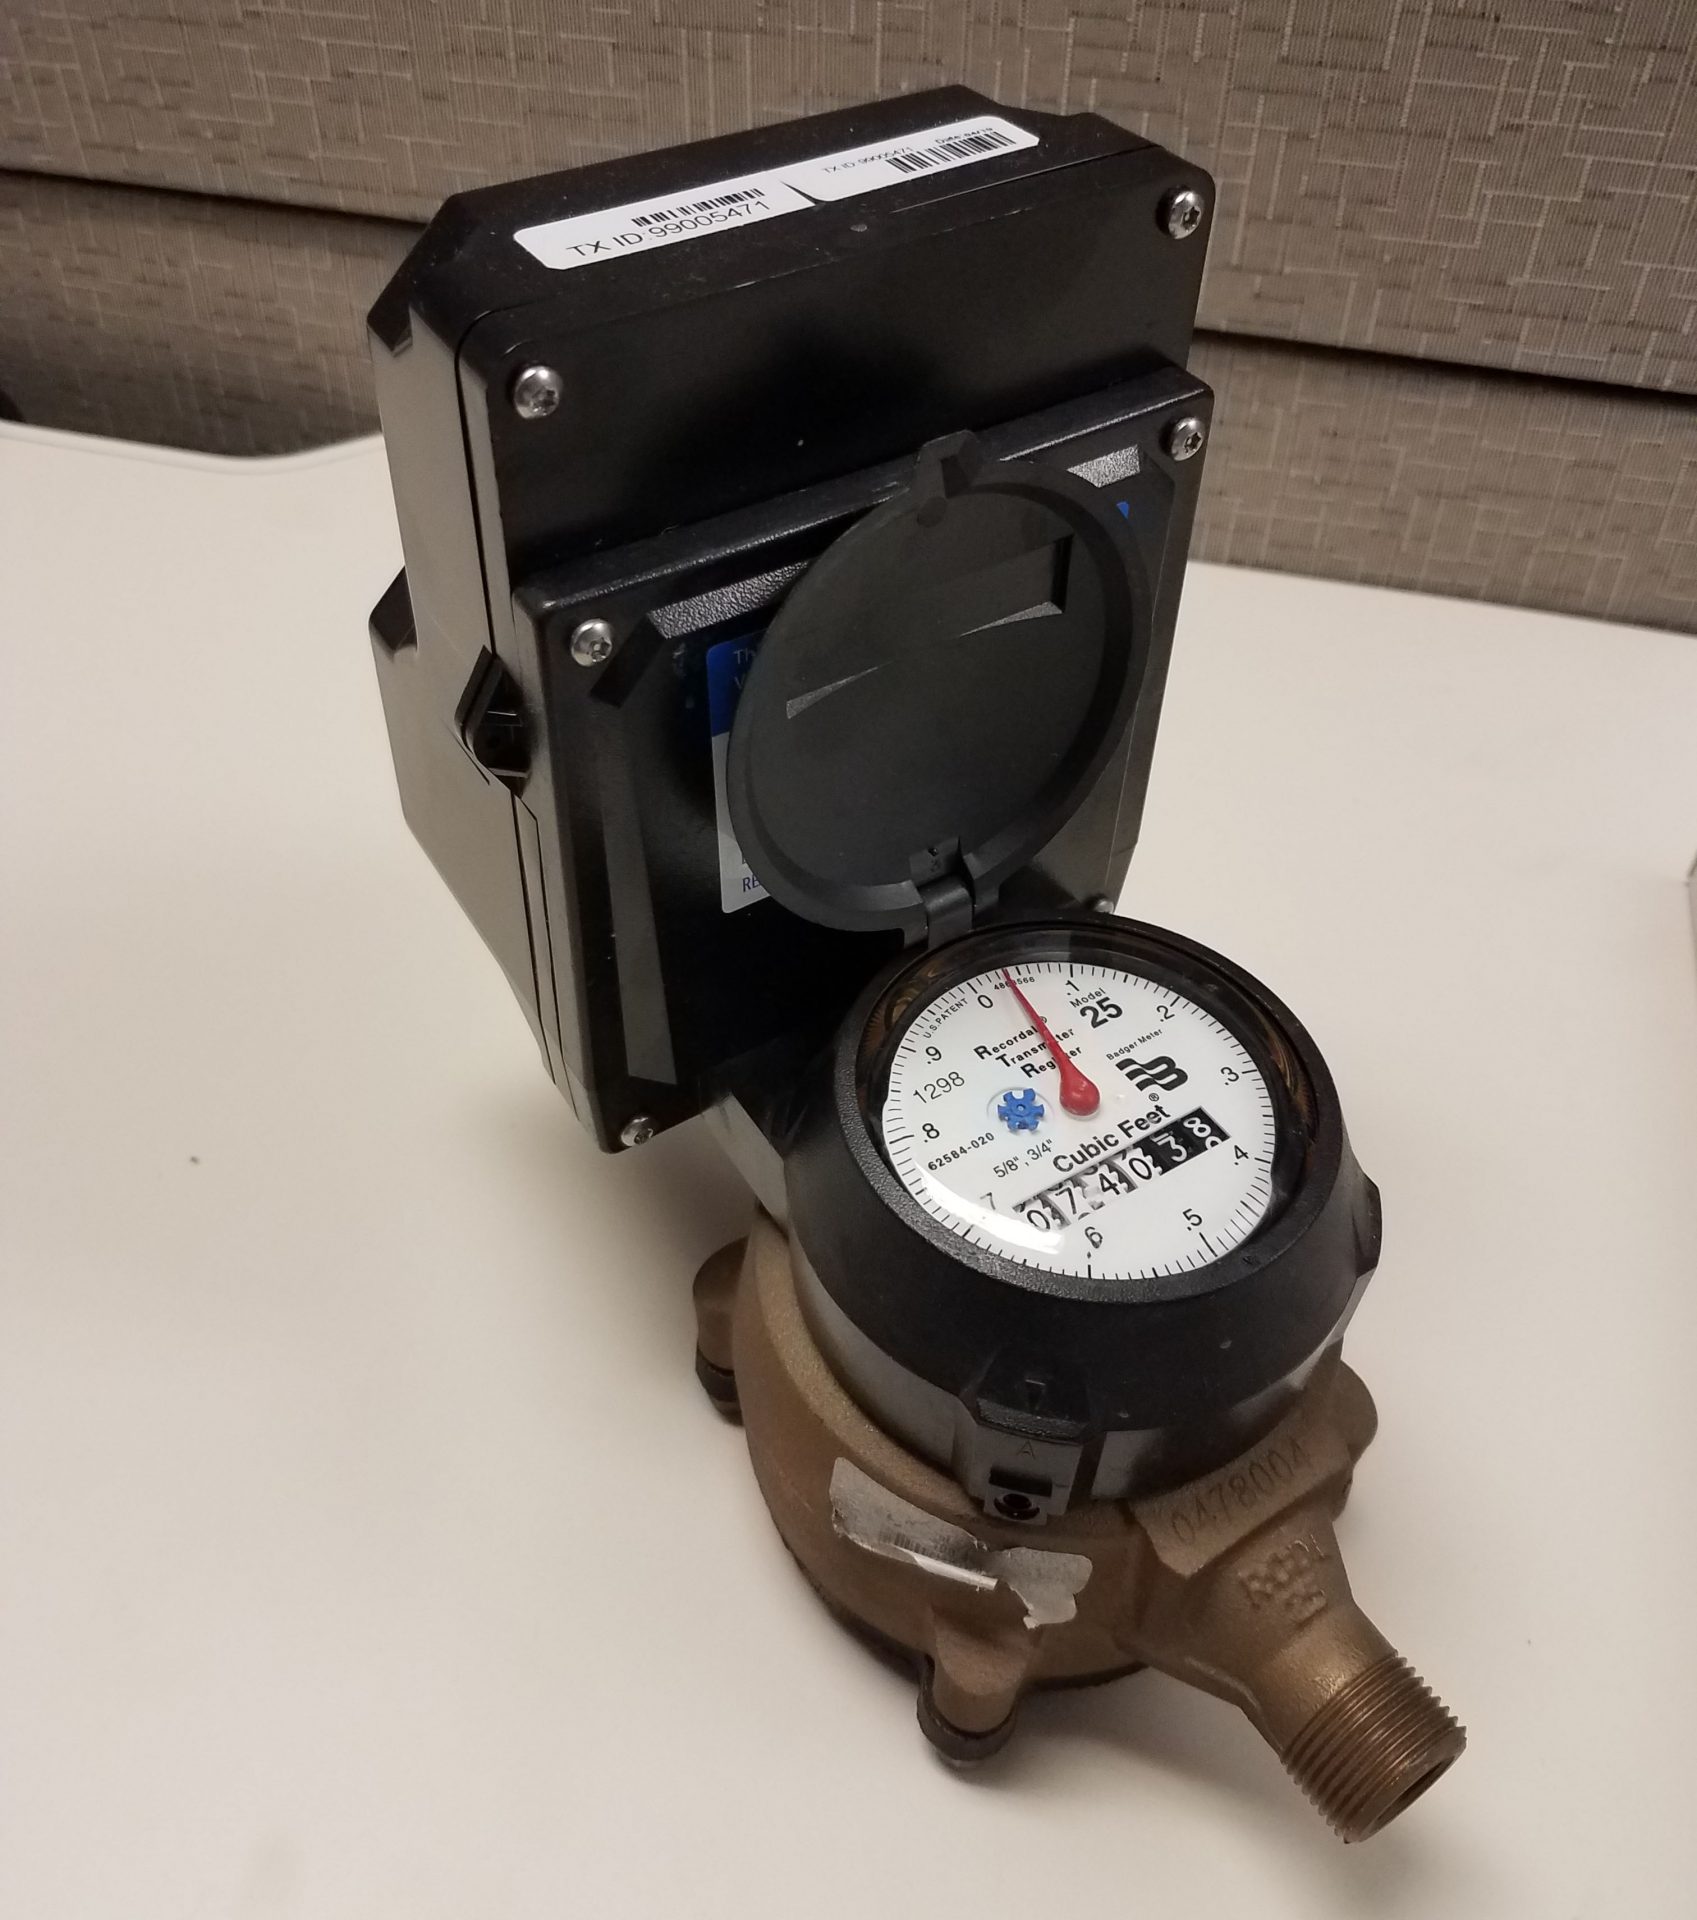 The Philadelphia Water Department will be checking for lead pipes when installing newly upgraded meters, like the one pictured here. 